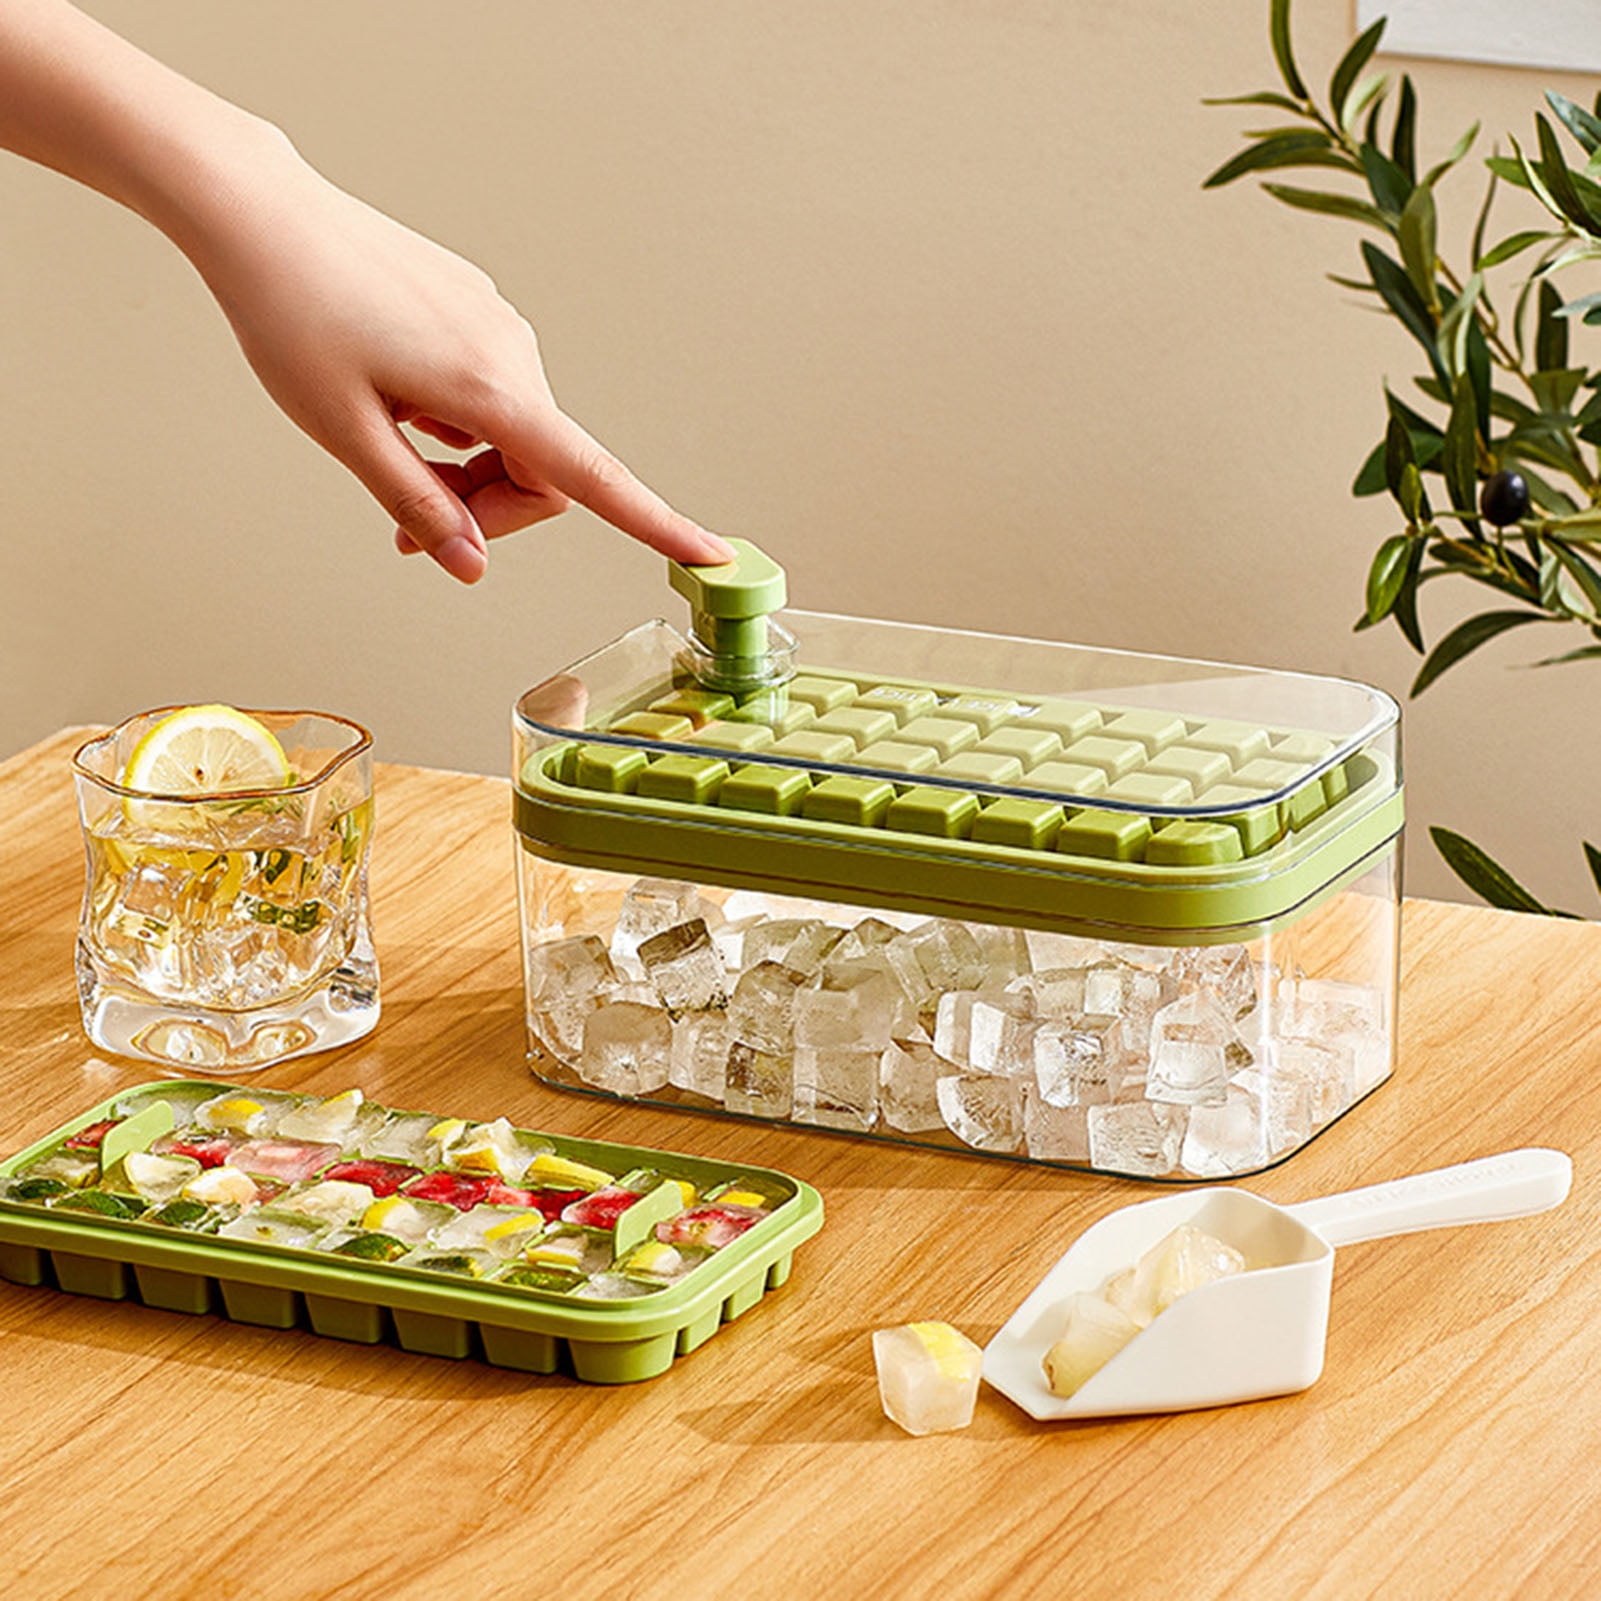 READY STOCK！24 Grid Silicone Ice Cube Tray Silicone Jelly Mold Trays  Pudding Maker Ice Cube Mold Maker